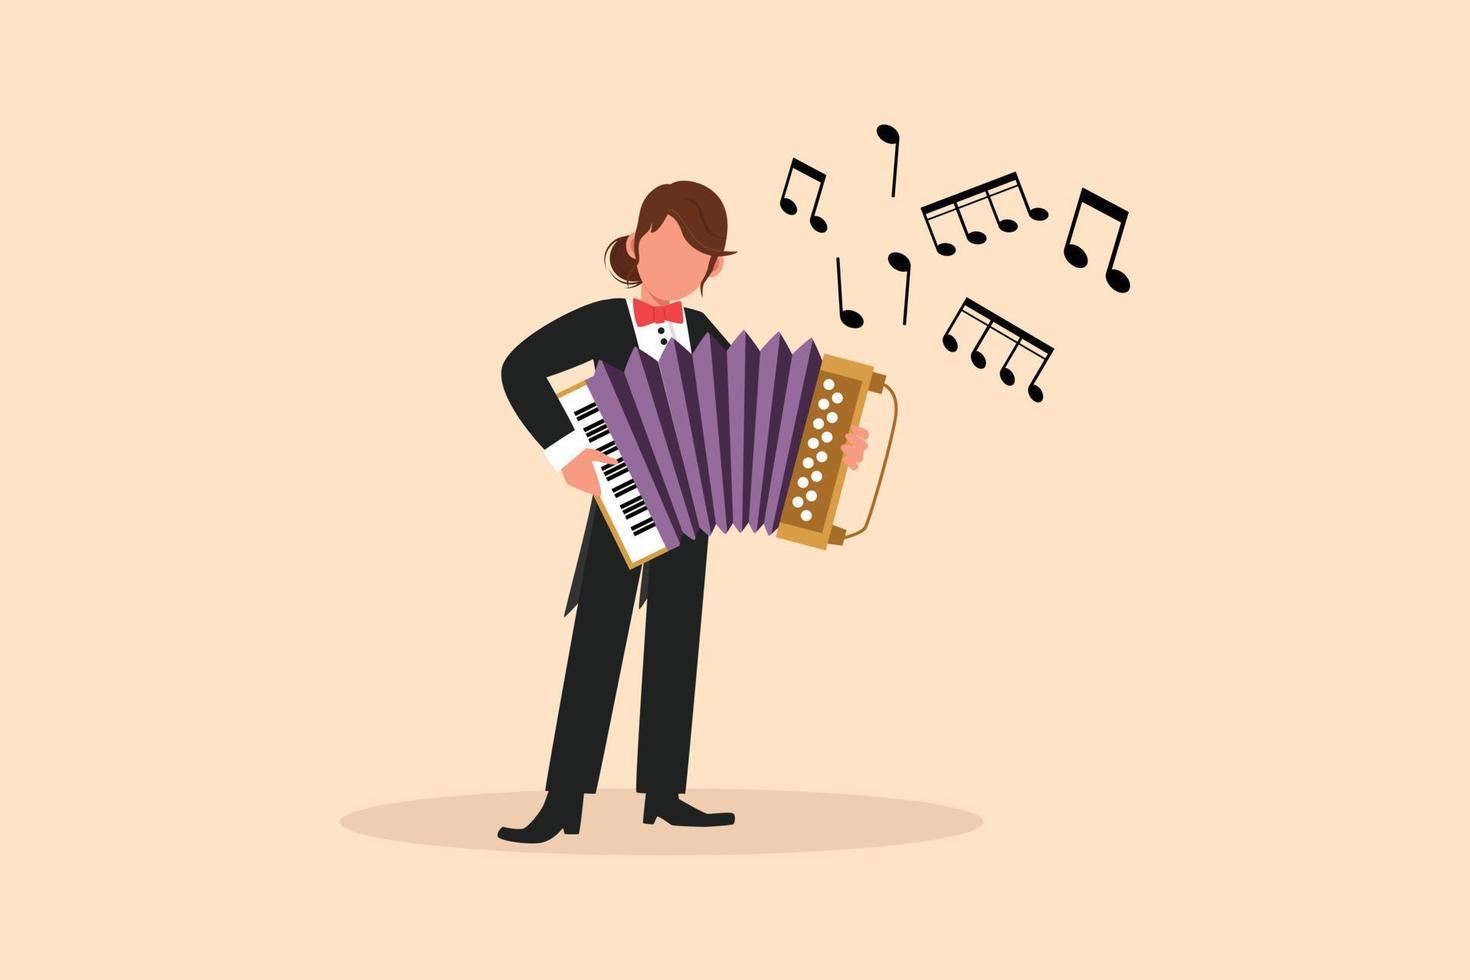 Business design drawing woman musician playing accordion. Female performer plays acoustic musical instrument. Accordionist perform playing music instrument. Flat cartoon style vector illustration